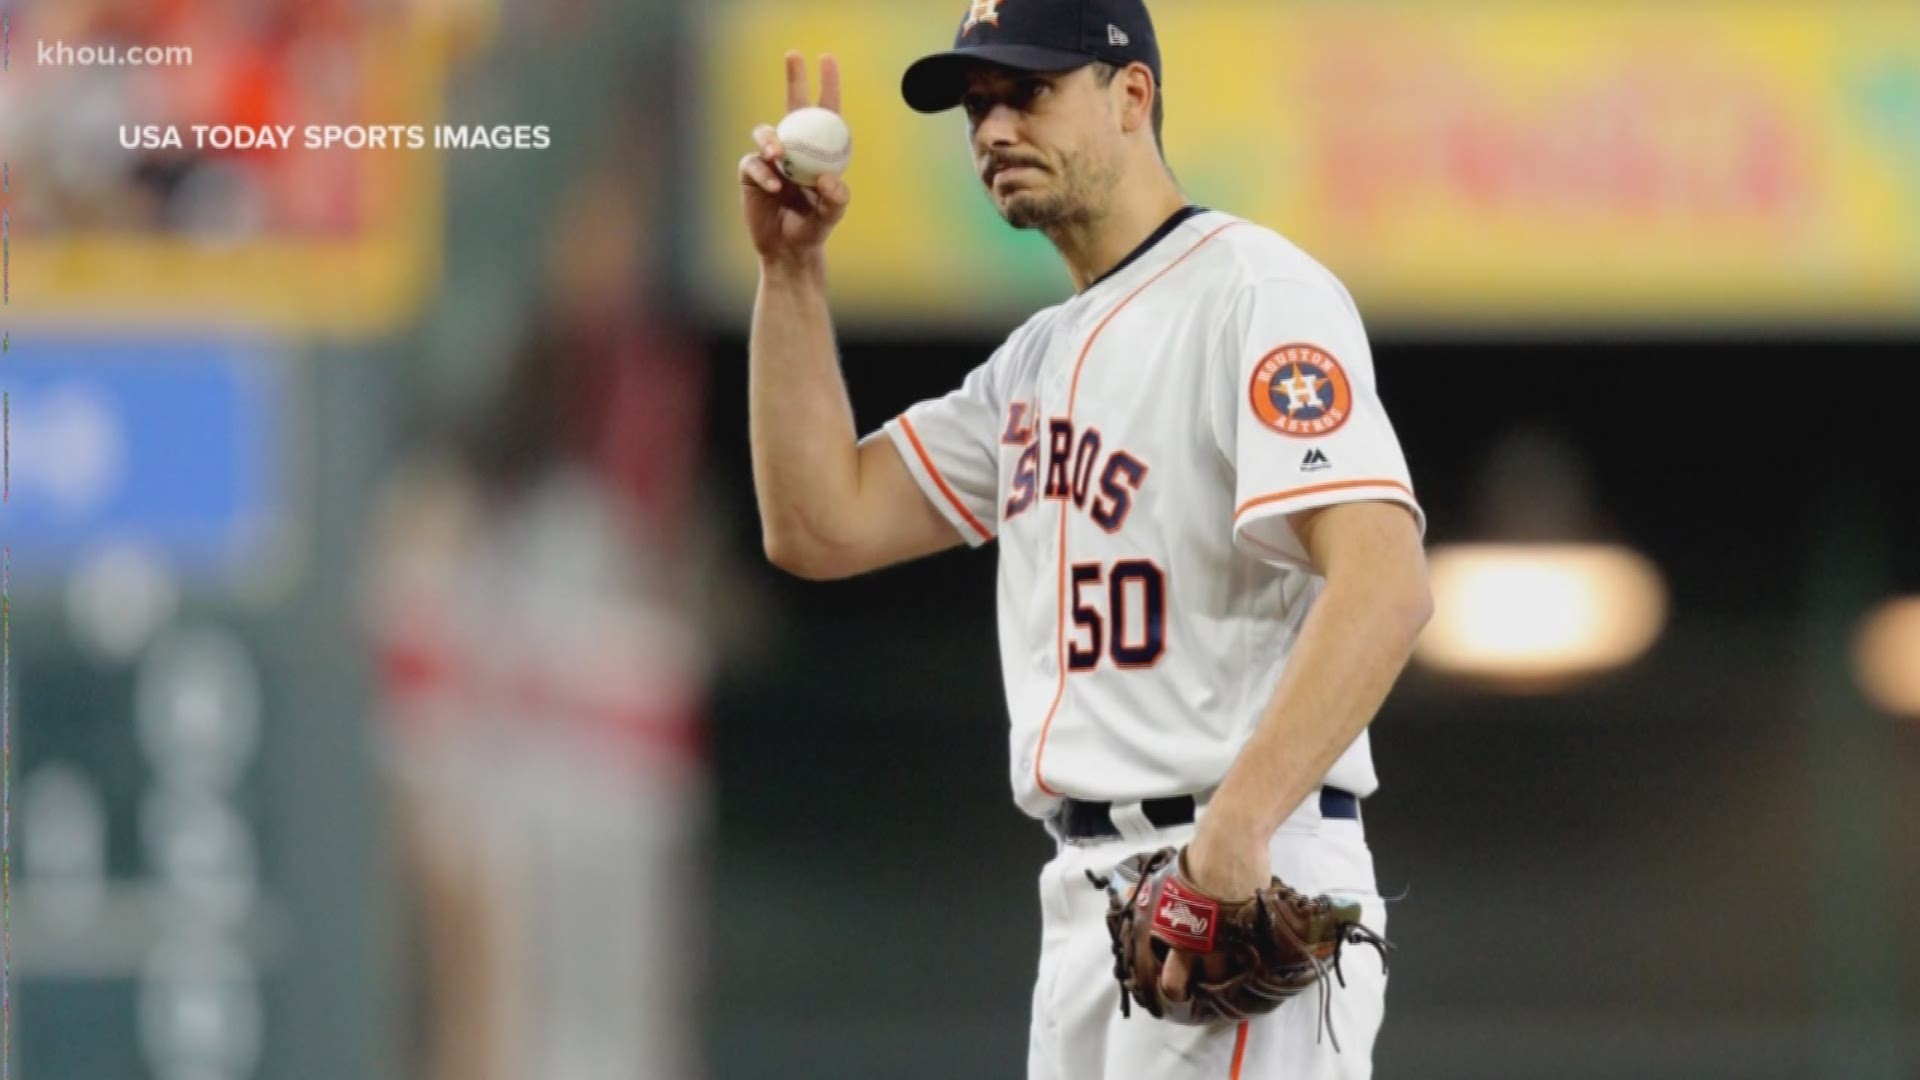 All-Star pitcher Charlie Morton and the Tampa Bay Rays have reportedly reached a $30 million, two-year deal.